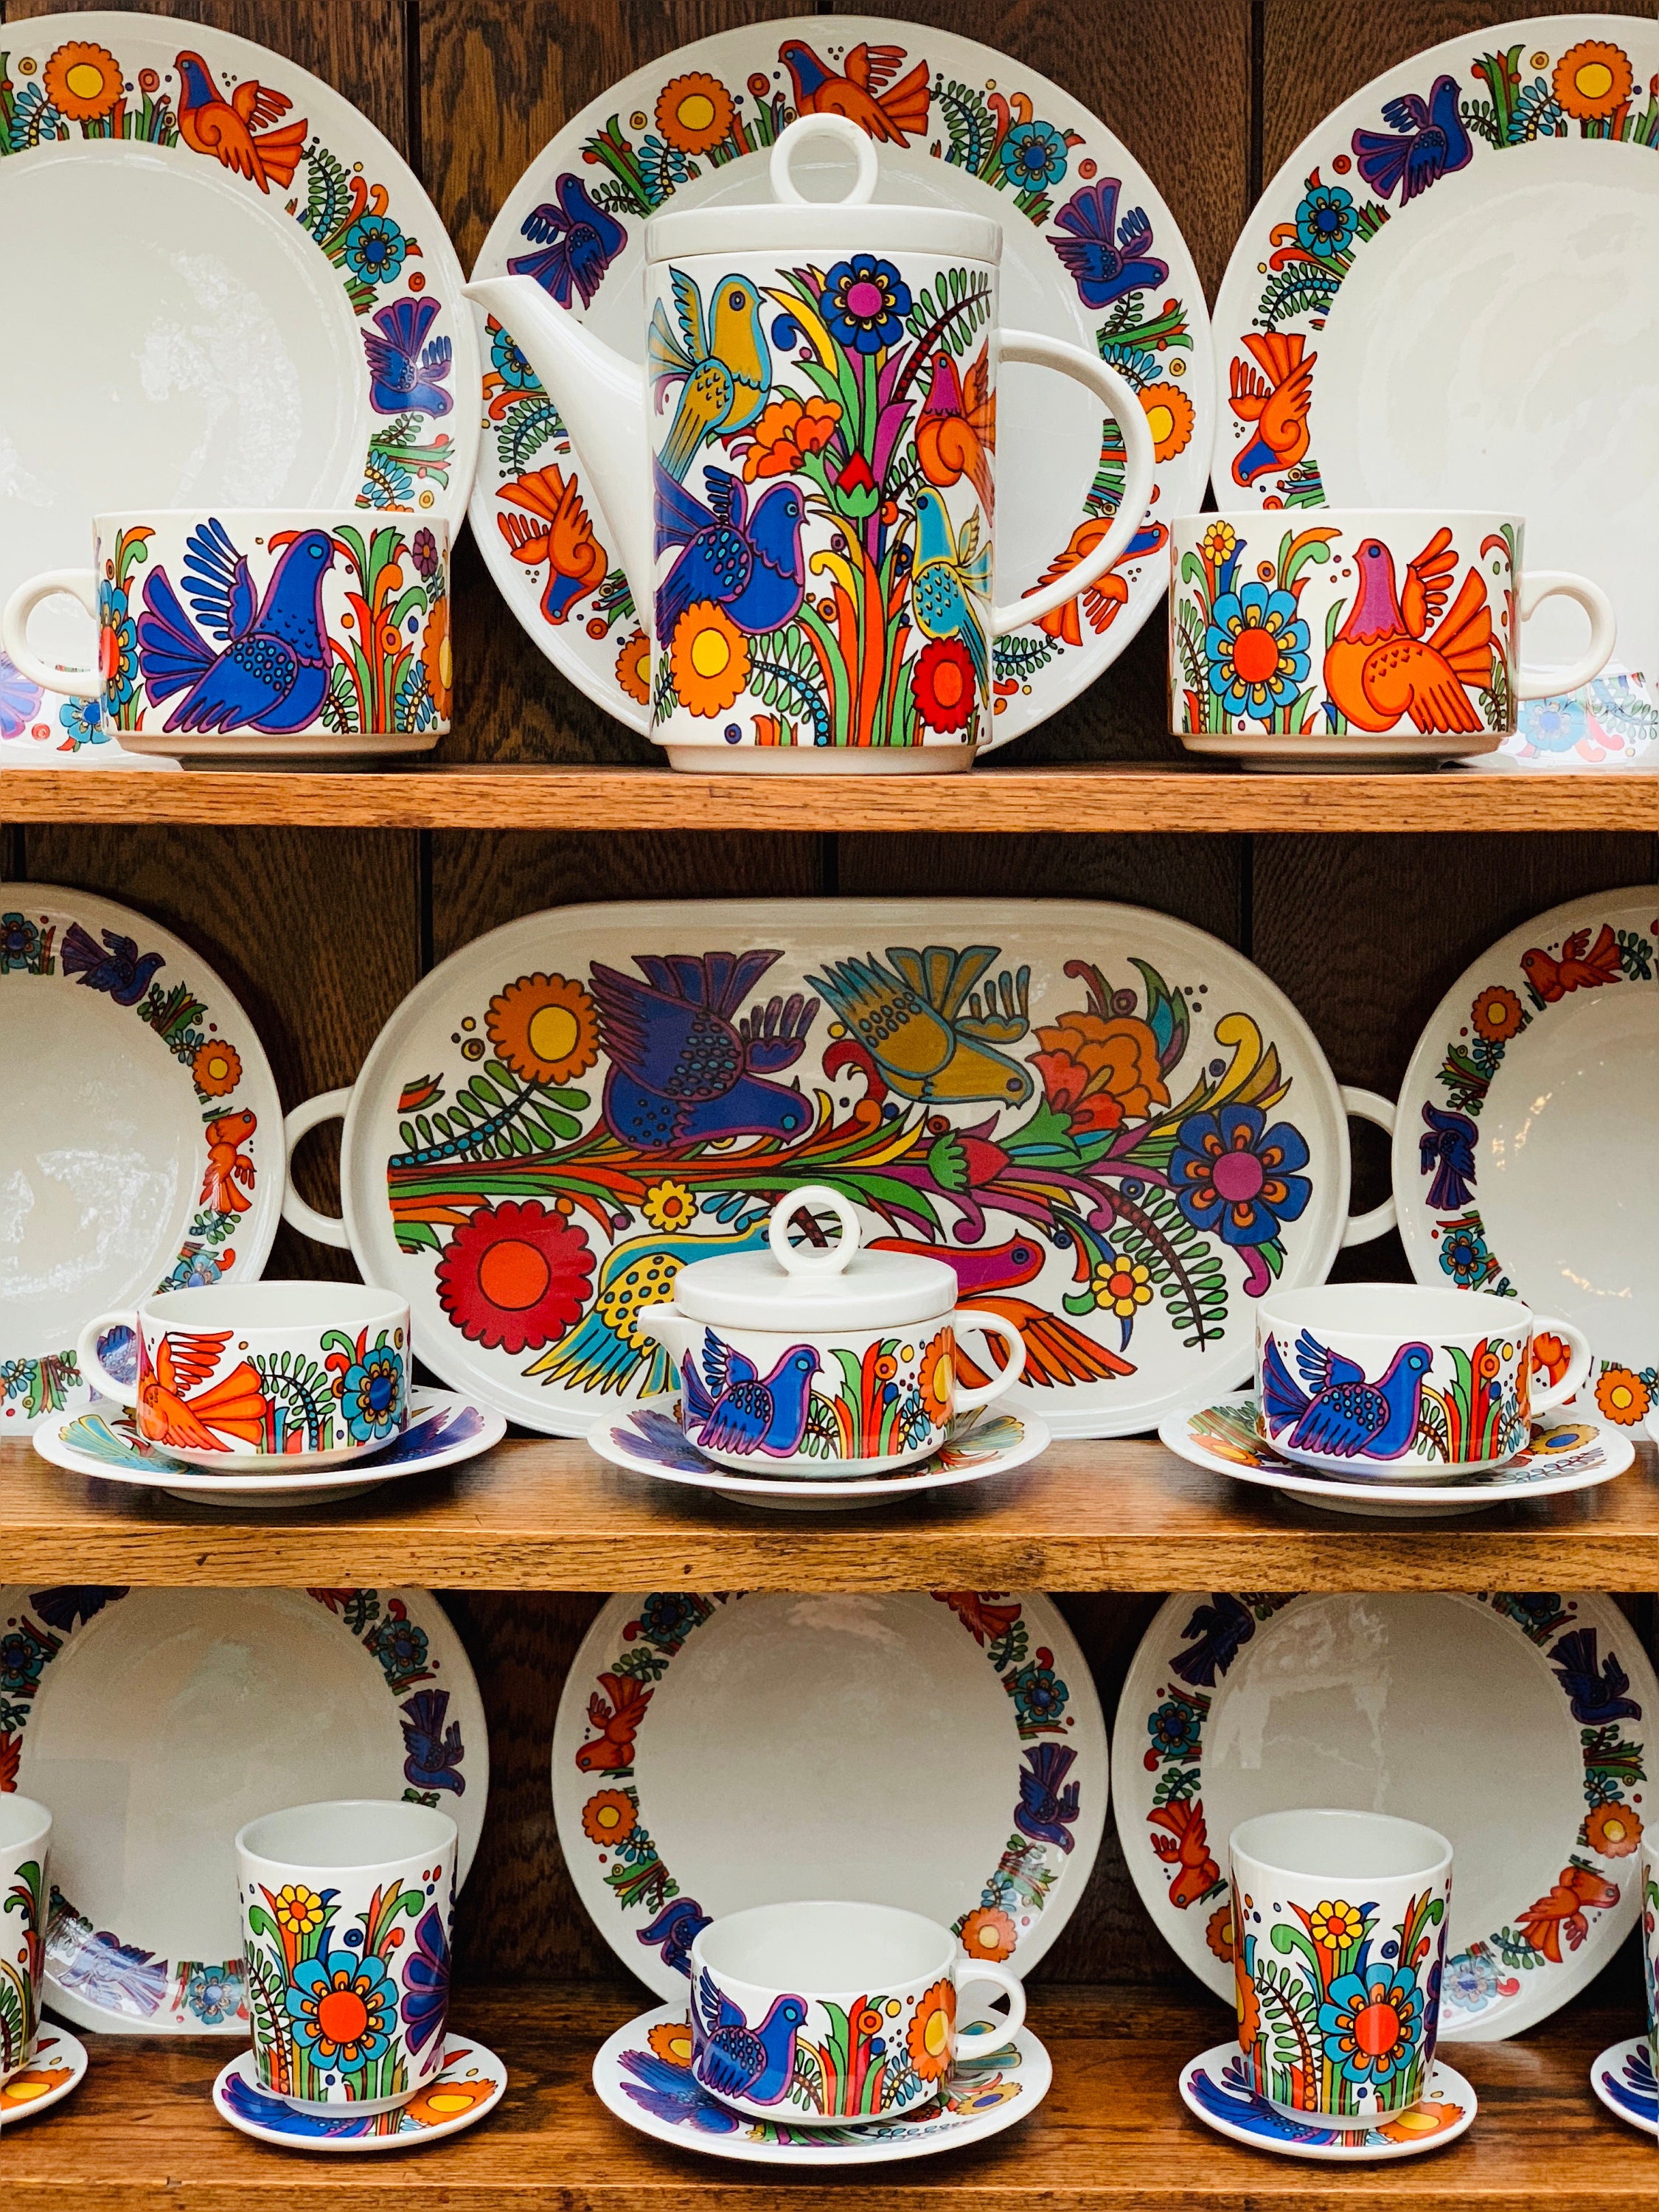 Huge 60-piece Villeroy & Boch Acapulco Collection including Ultra Rare  Beakers, Coffee Pot, Enamel Pans and Serving Tray